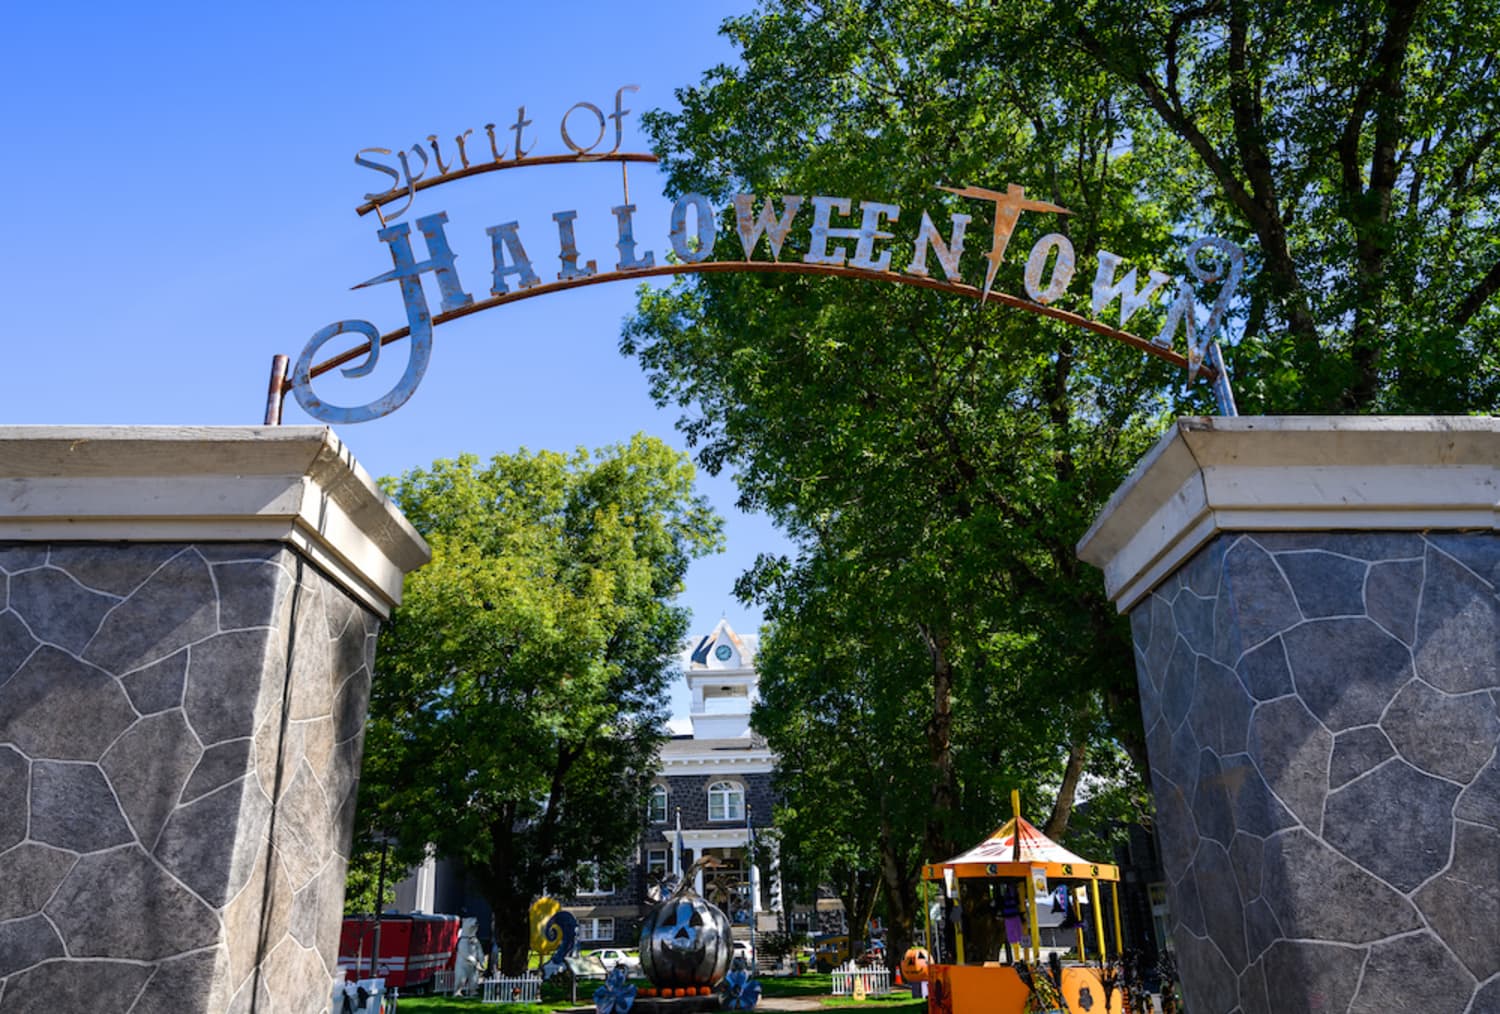 A Real Halloweentown Exists in Oregon